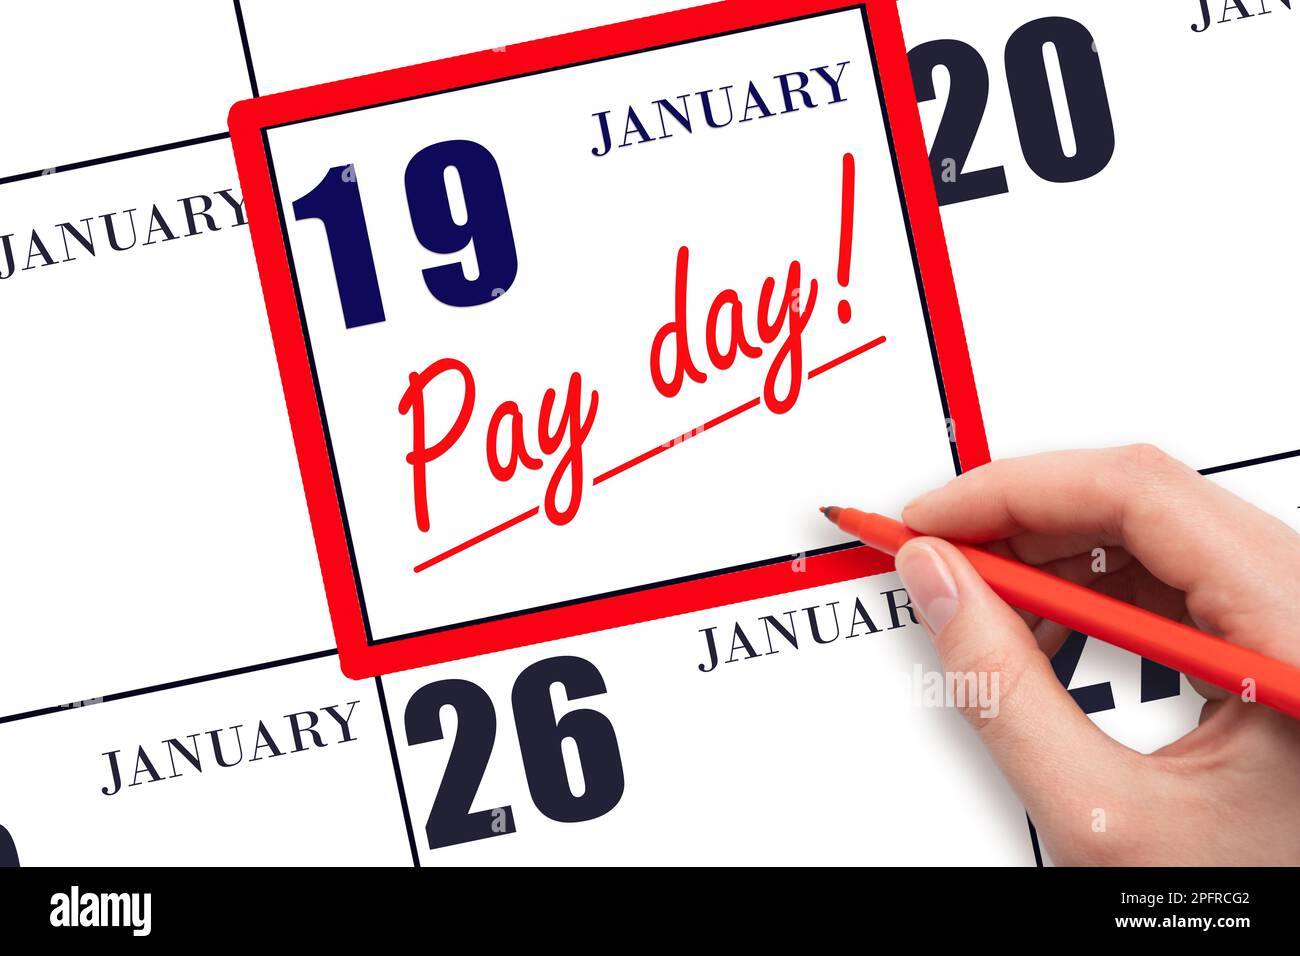 19th day of January. Hand writing text PAY DATE on calendar date January 19 and underline it. Payment due date.  Reminder concept of payment. Winter m Stock Photo